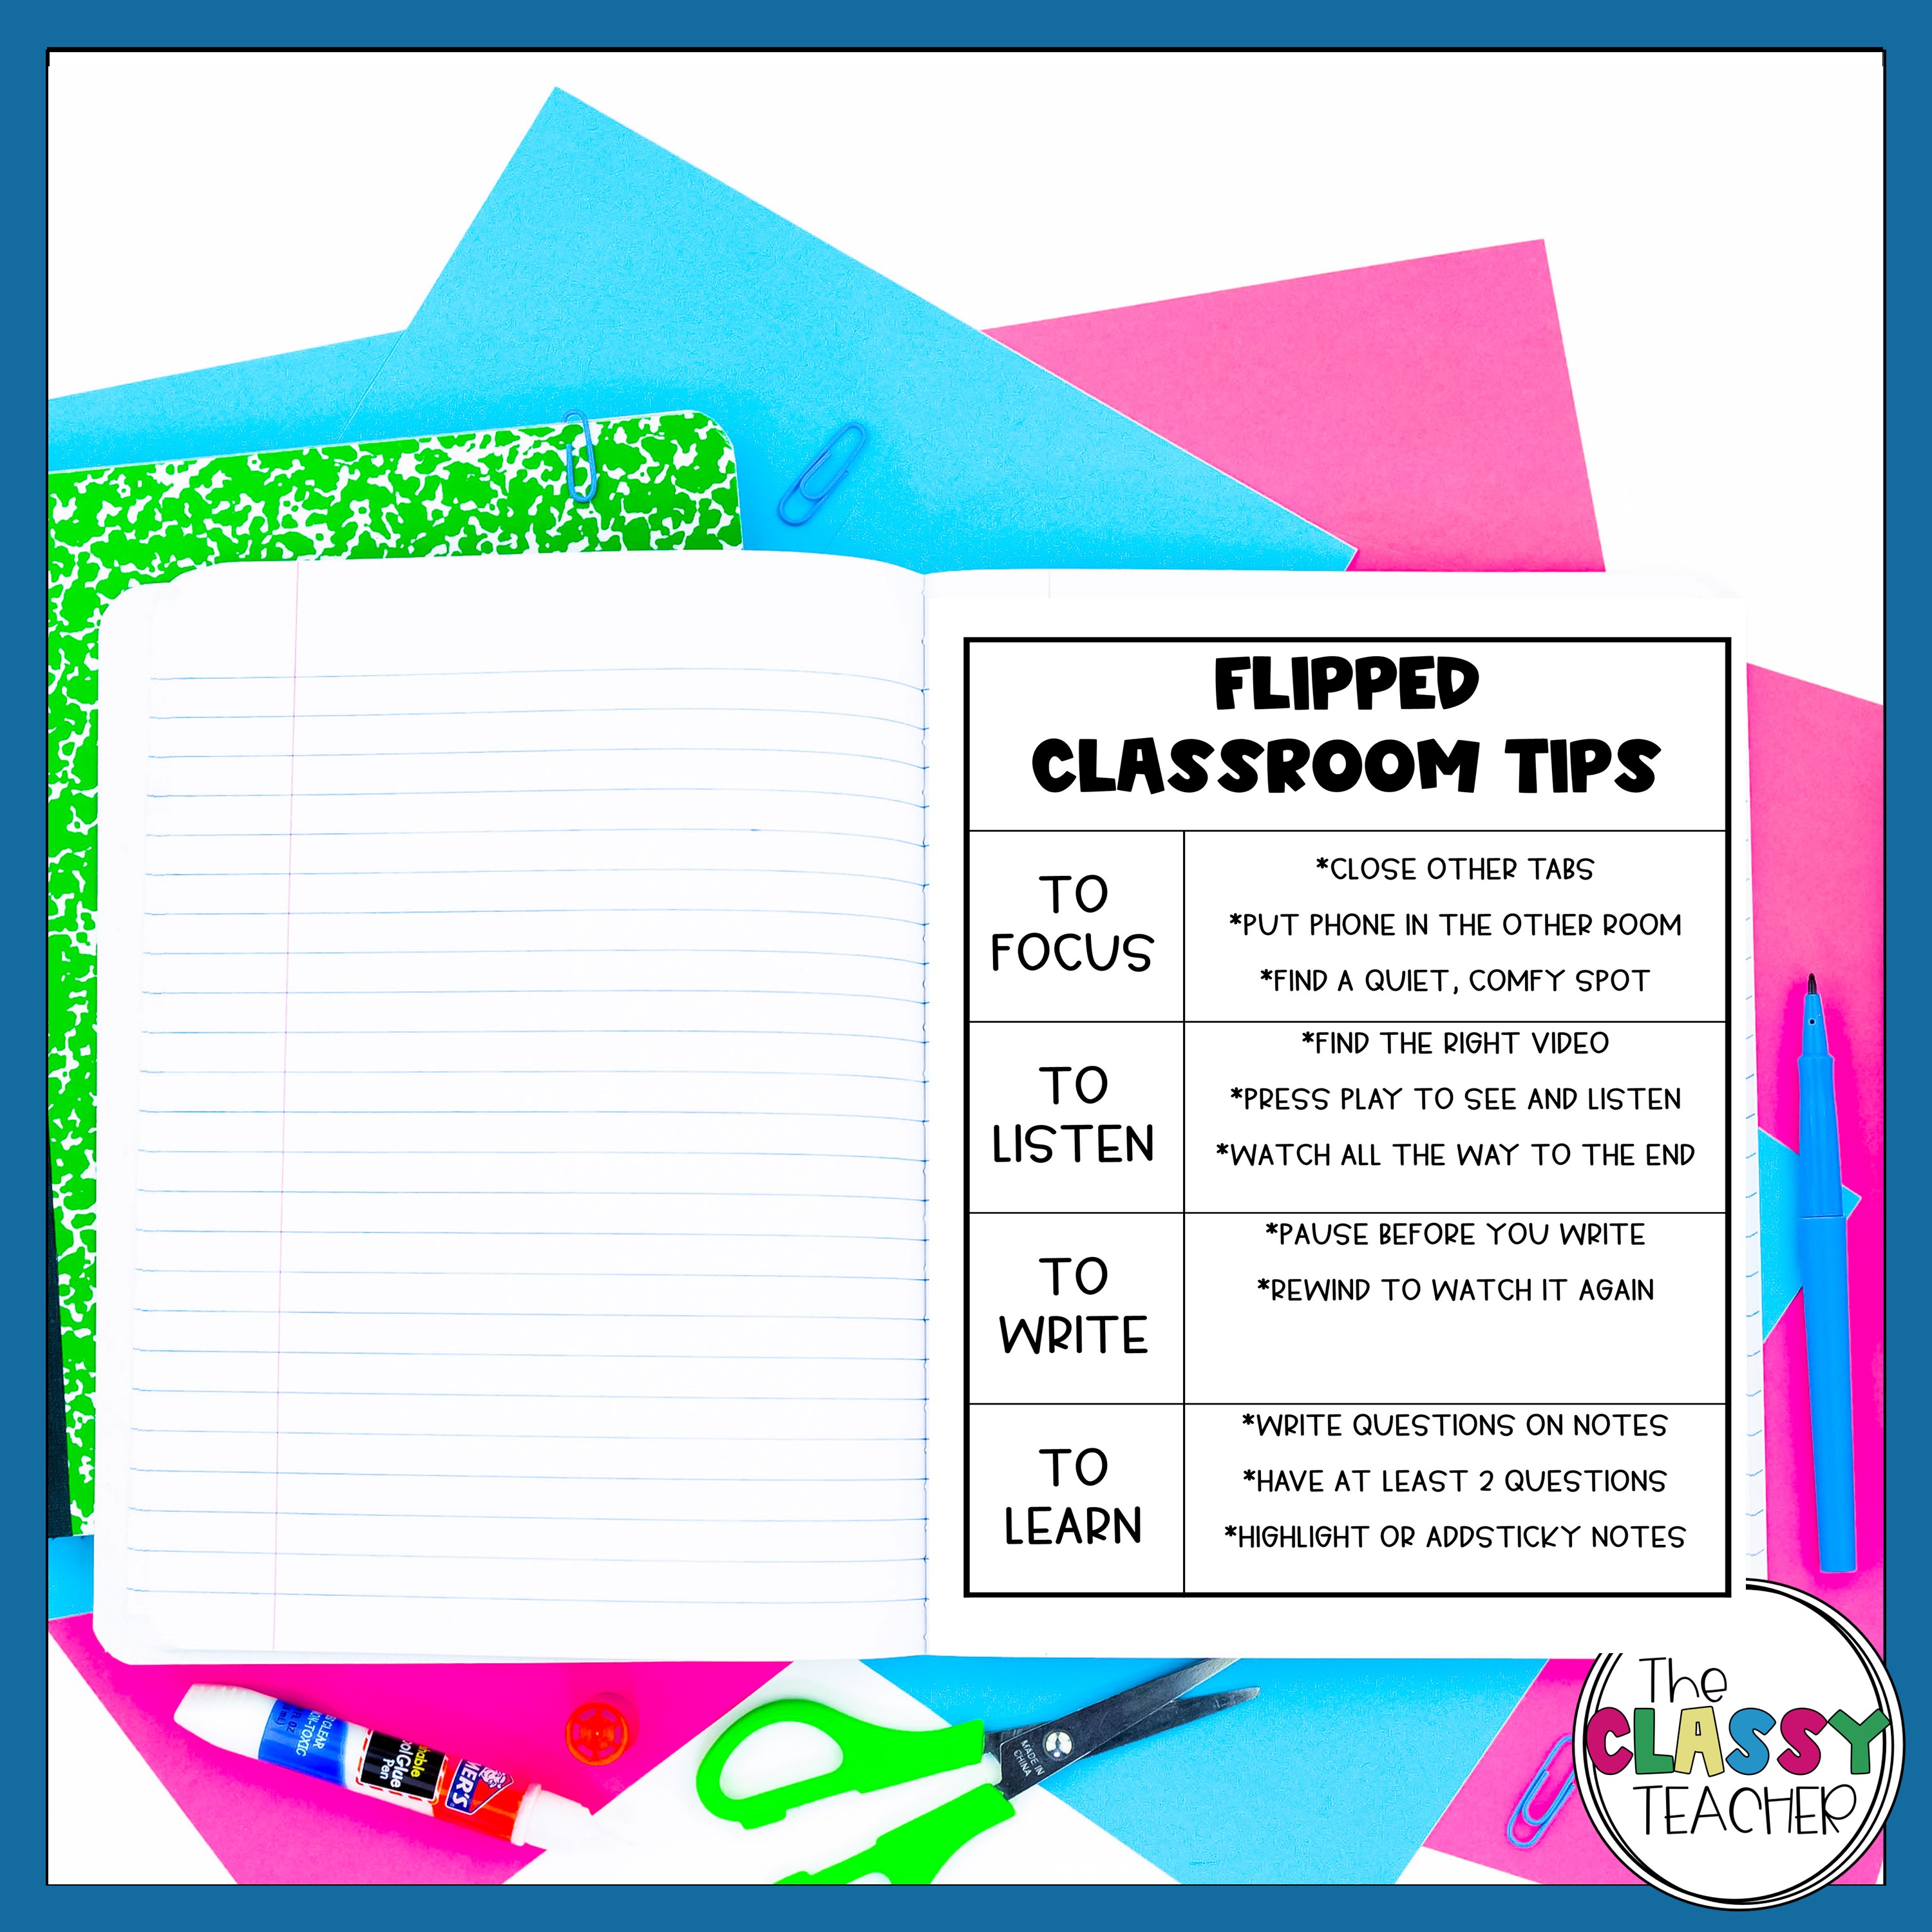 flipped classroom tips in a composition notebook